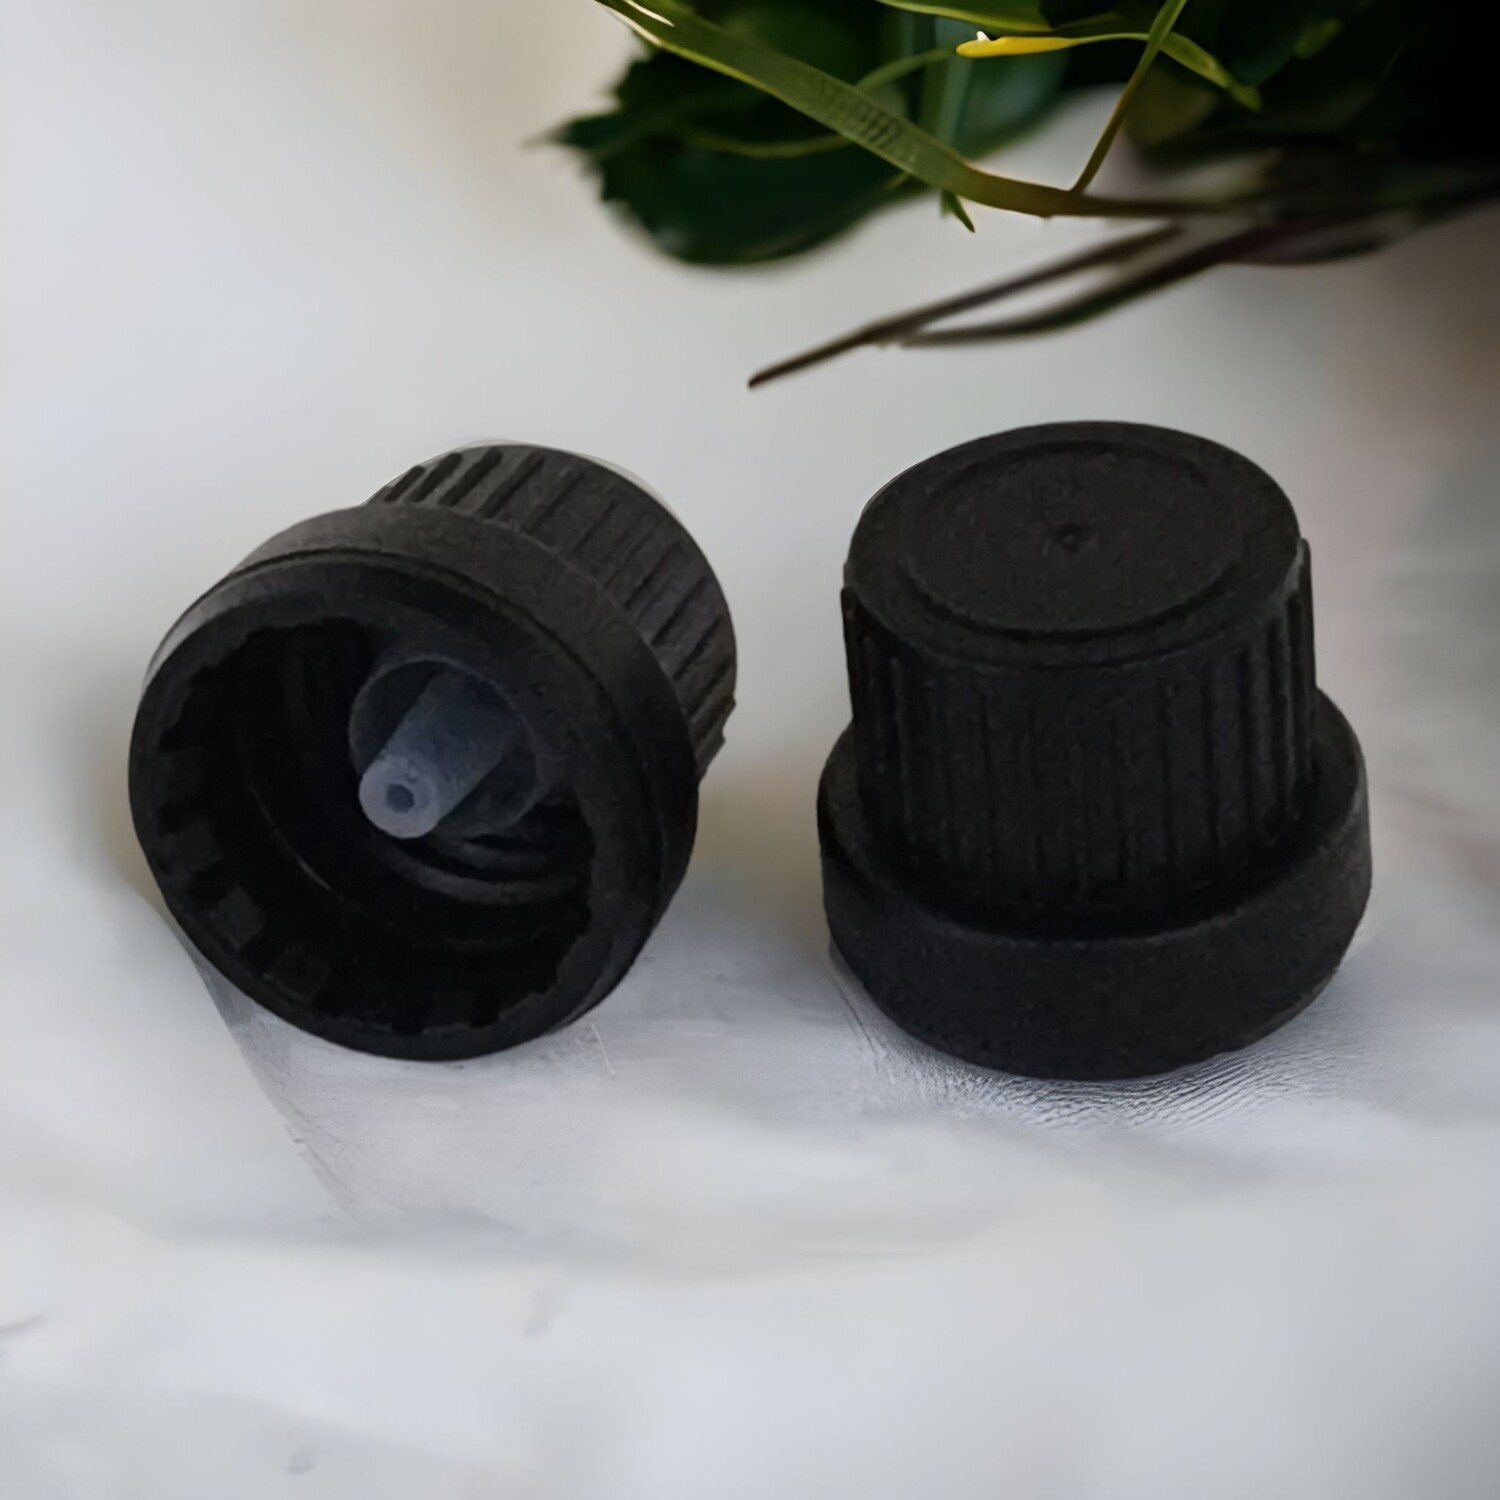 18mm BLACK Dripulator Tamper Caps (Euro Style) with Centre Drip Neck Insert FOR GLASS BOTTLES Only - PACK of 100